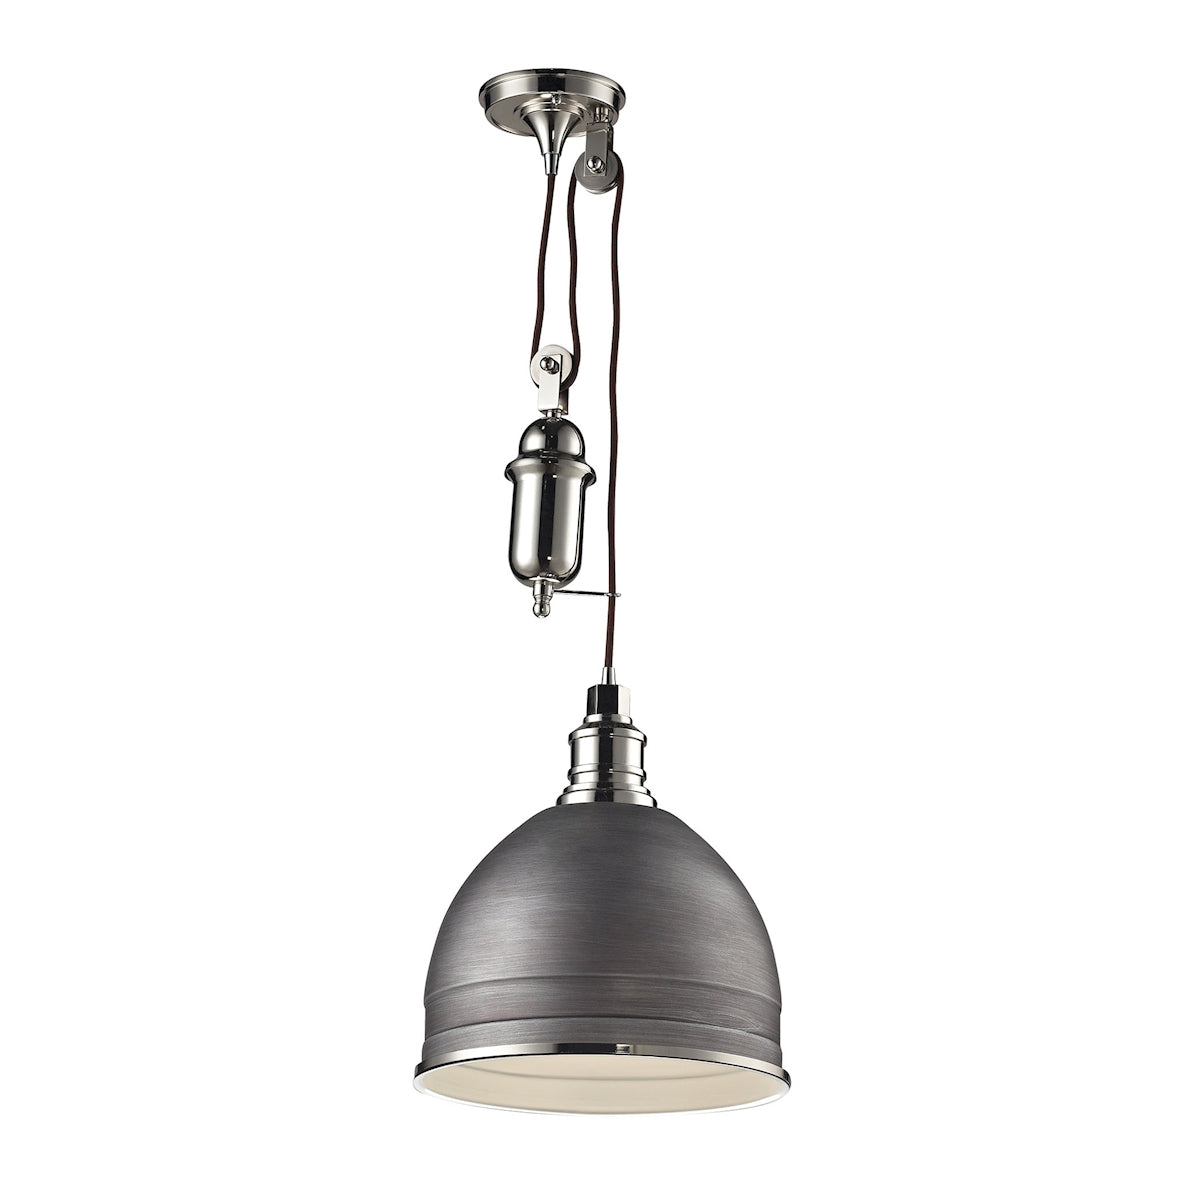 ELK Lighting 66883/1 Carolton 1-Light Adjustable Pendant in Polished Nickel and Weathered Zinc with Grey Shade